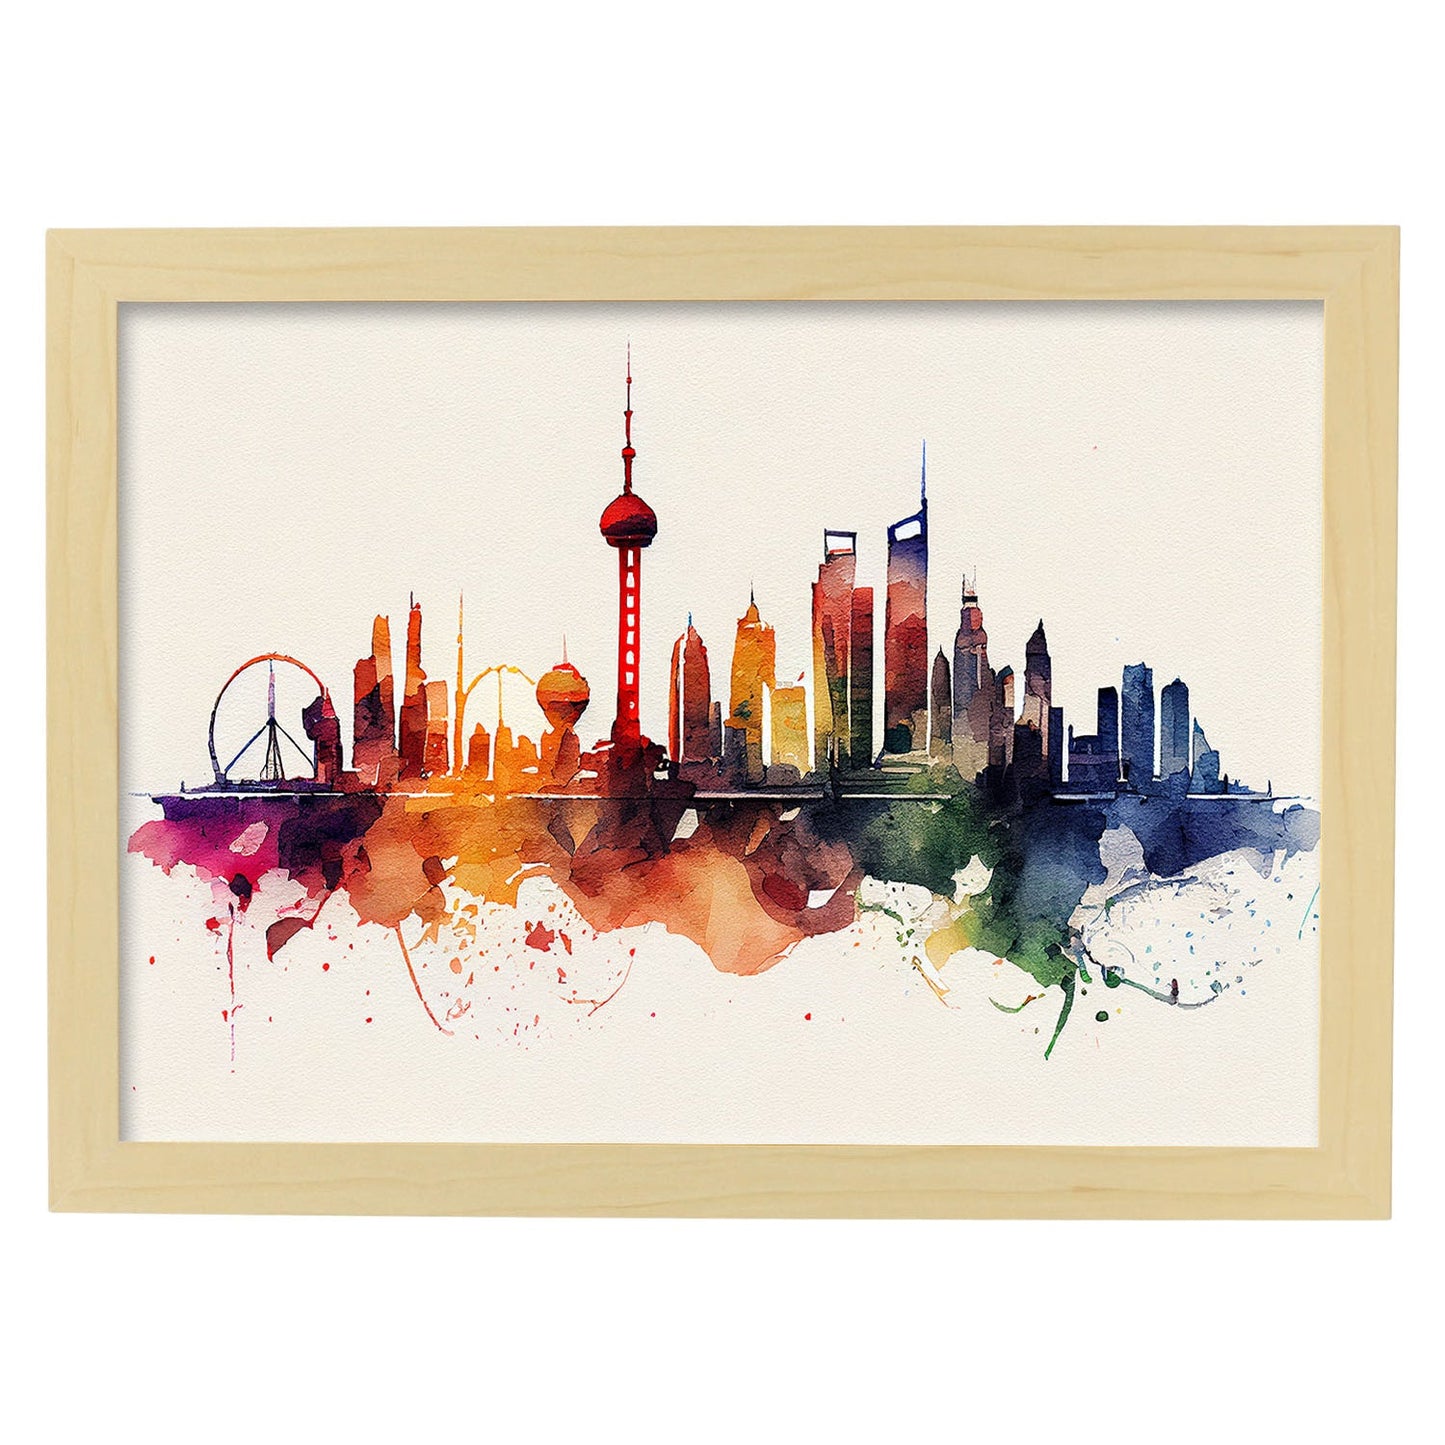 Nacnic watercolor of a skyline of the city of Shanghai_2. Aesthetic Wall Art Prints for Bedroom or Living Room Design.-Artwork-Nacnic-A4-Marco Madera Clara-Nacnic Estudio SL